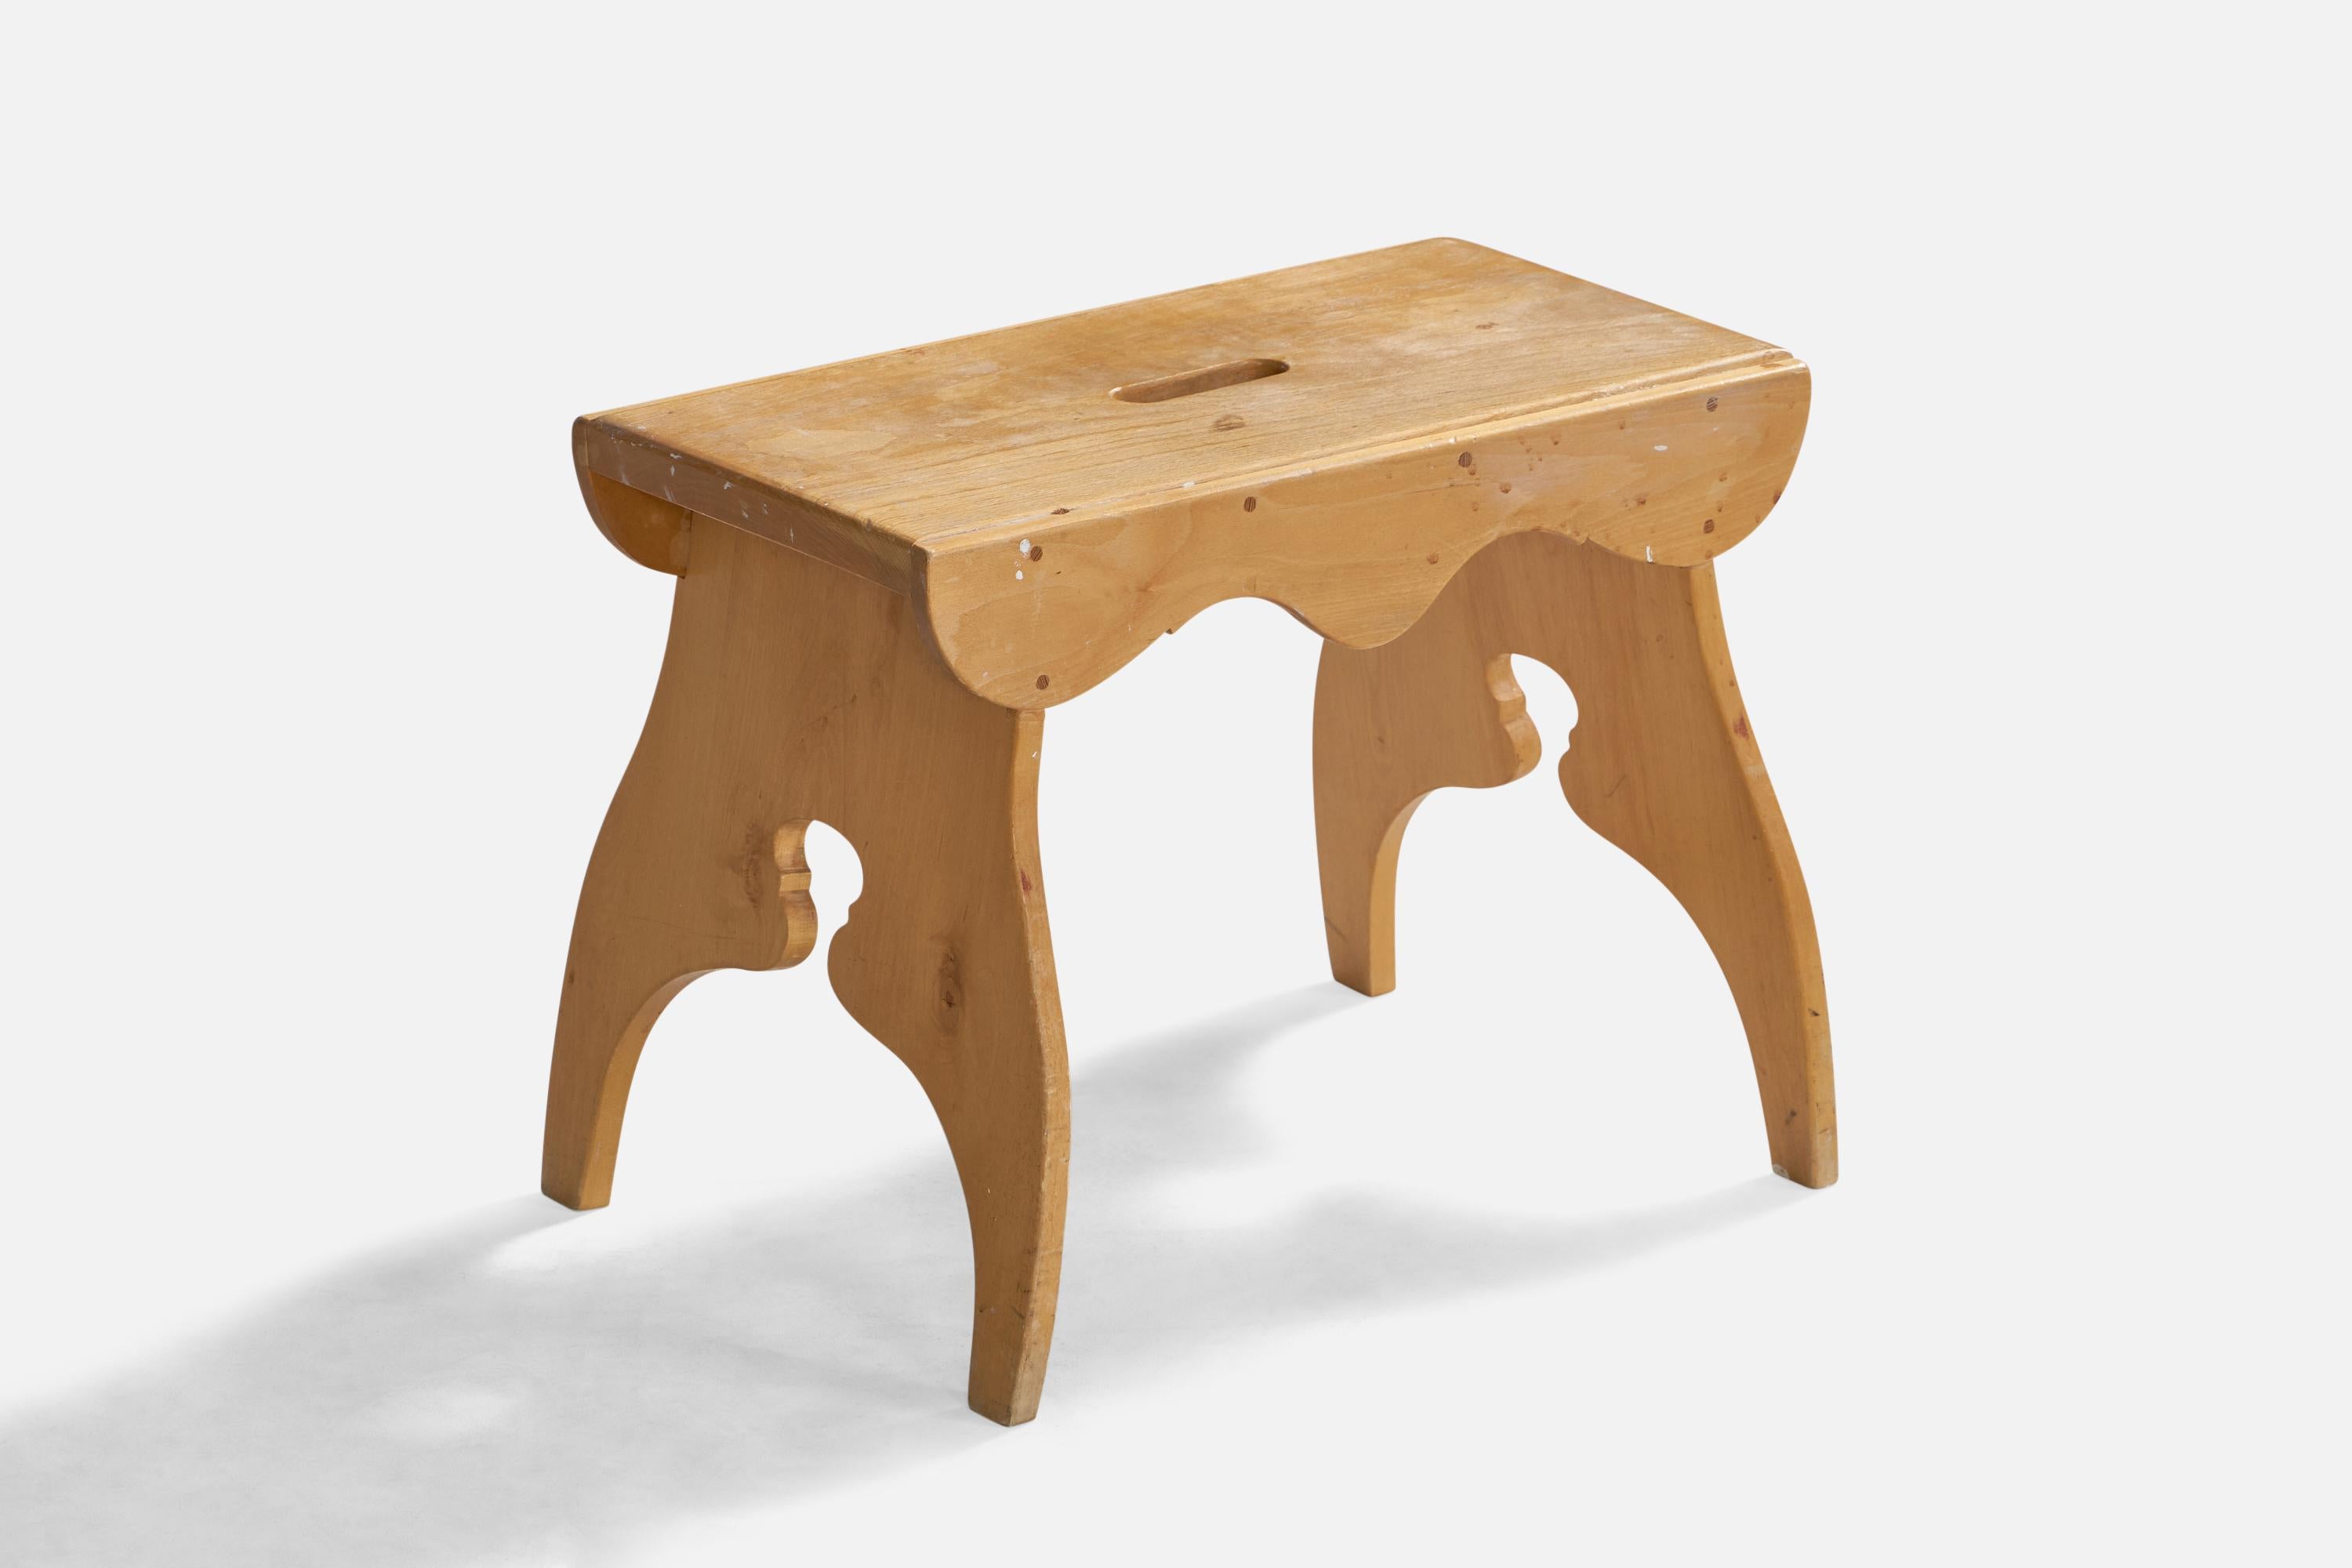 A pine stool designed and produced in Sweden, c. 1960s.

Seat height: 13.68”